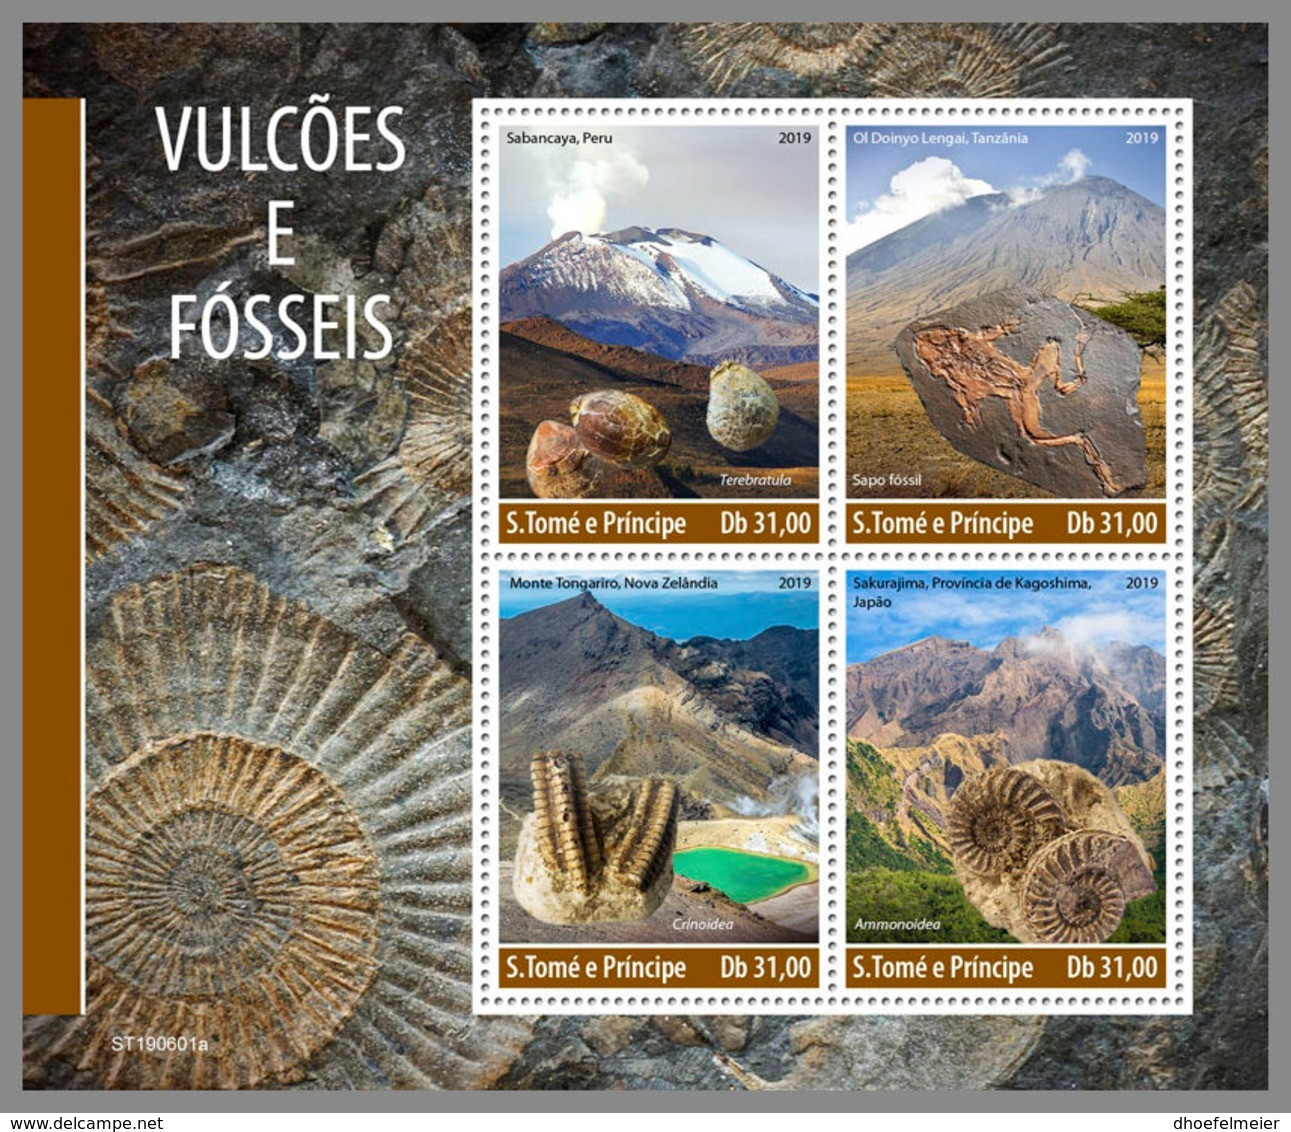 SAO TOME 2019 MNH Fossils Fossilien Fossiles M/S - OFFICIAL ISSUE - DH1948 - Fossili